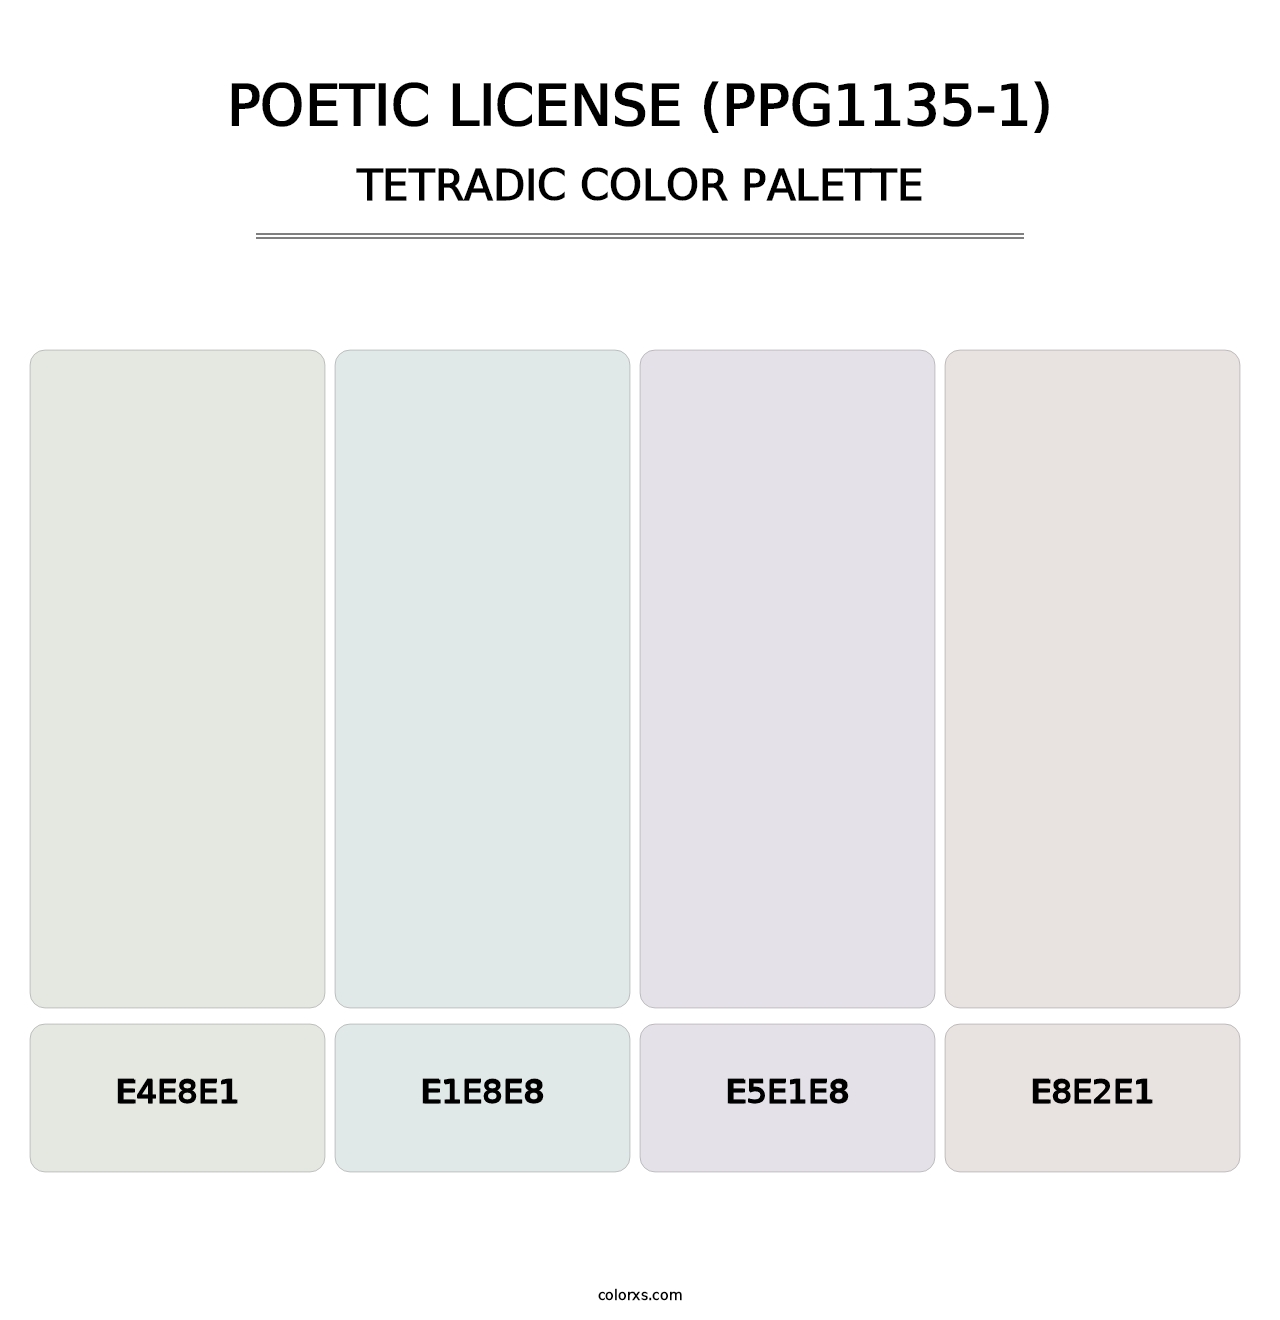 Poetic License (PPG1135-1) - Tetradic Color Palette